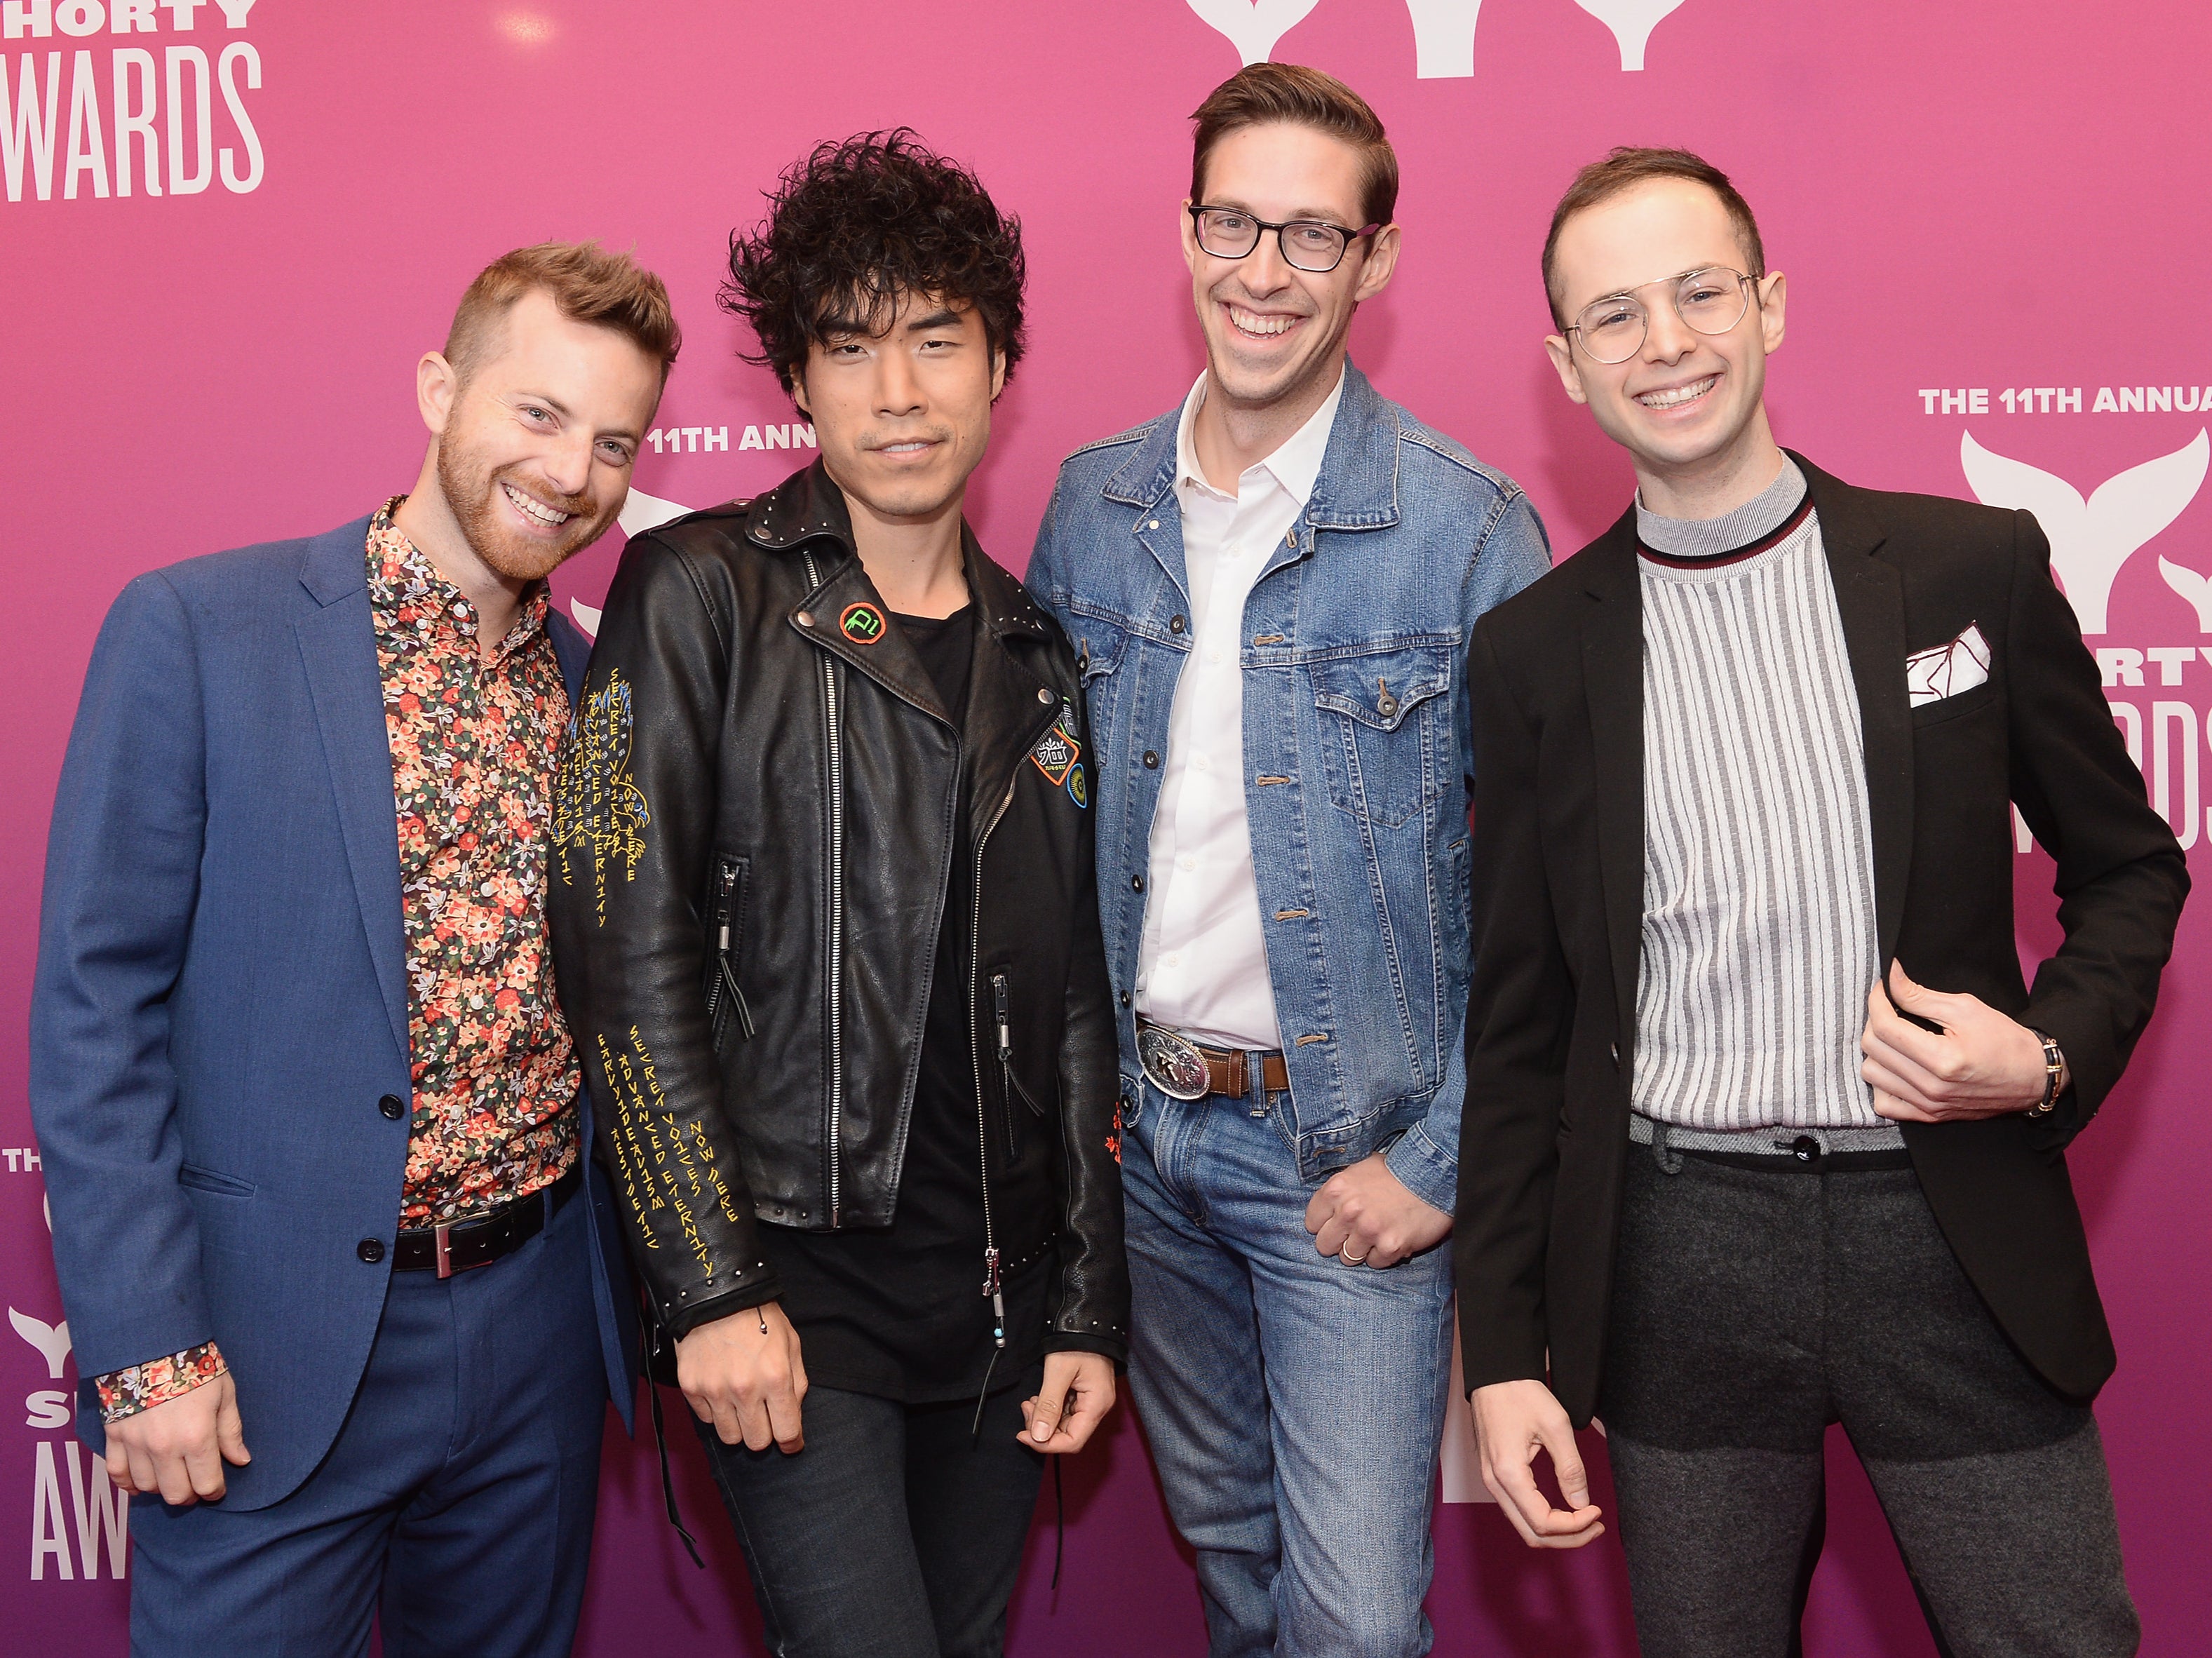 Ned Fulmer, Eugene Lee Yang, Keith Habersberger, and Zach Kornfeld (left to right) of The Try Guys attend the 11th Annual Shorty Awards on 5 May 2019 in New York City